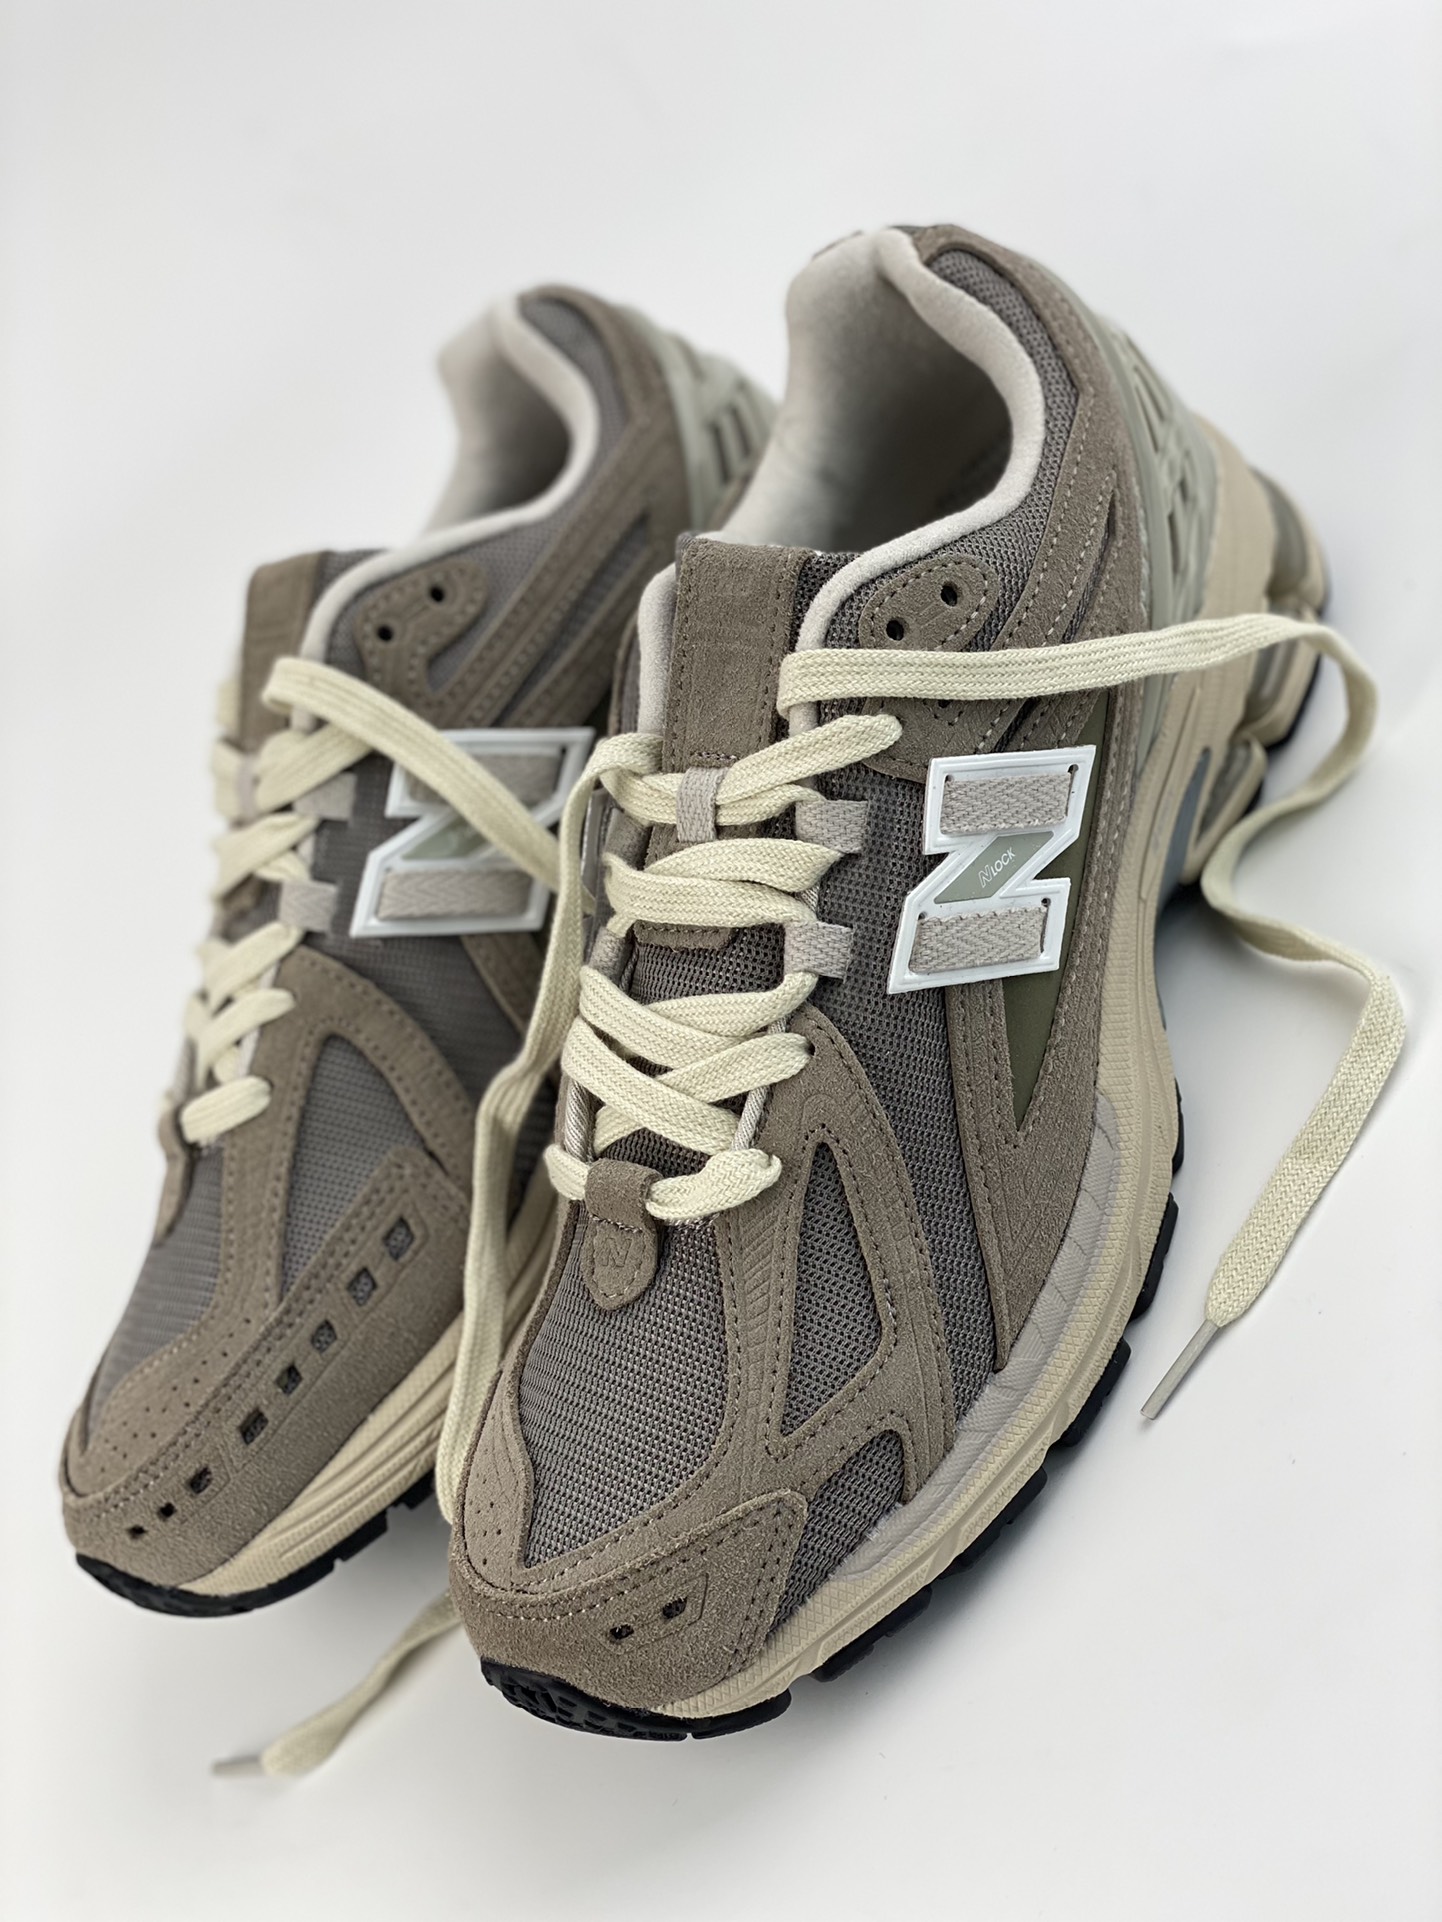 New Balance 1906 series retro dad style casual sports running shoes M1906RL